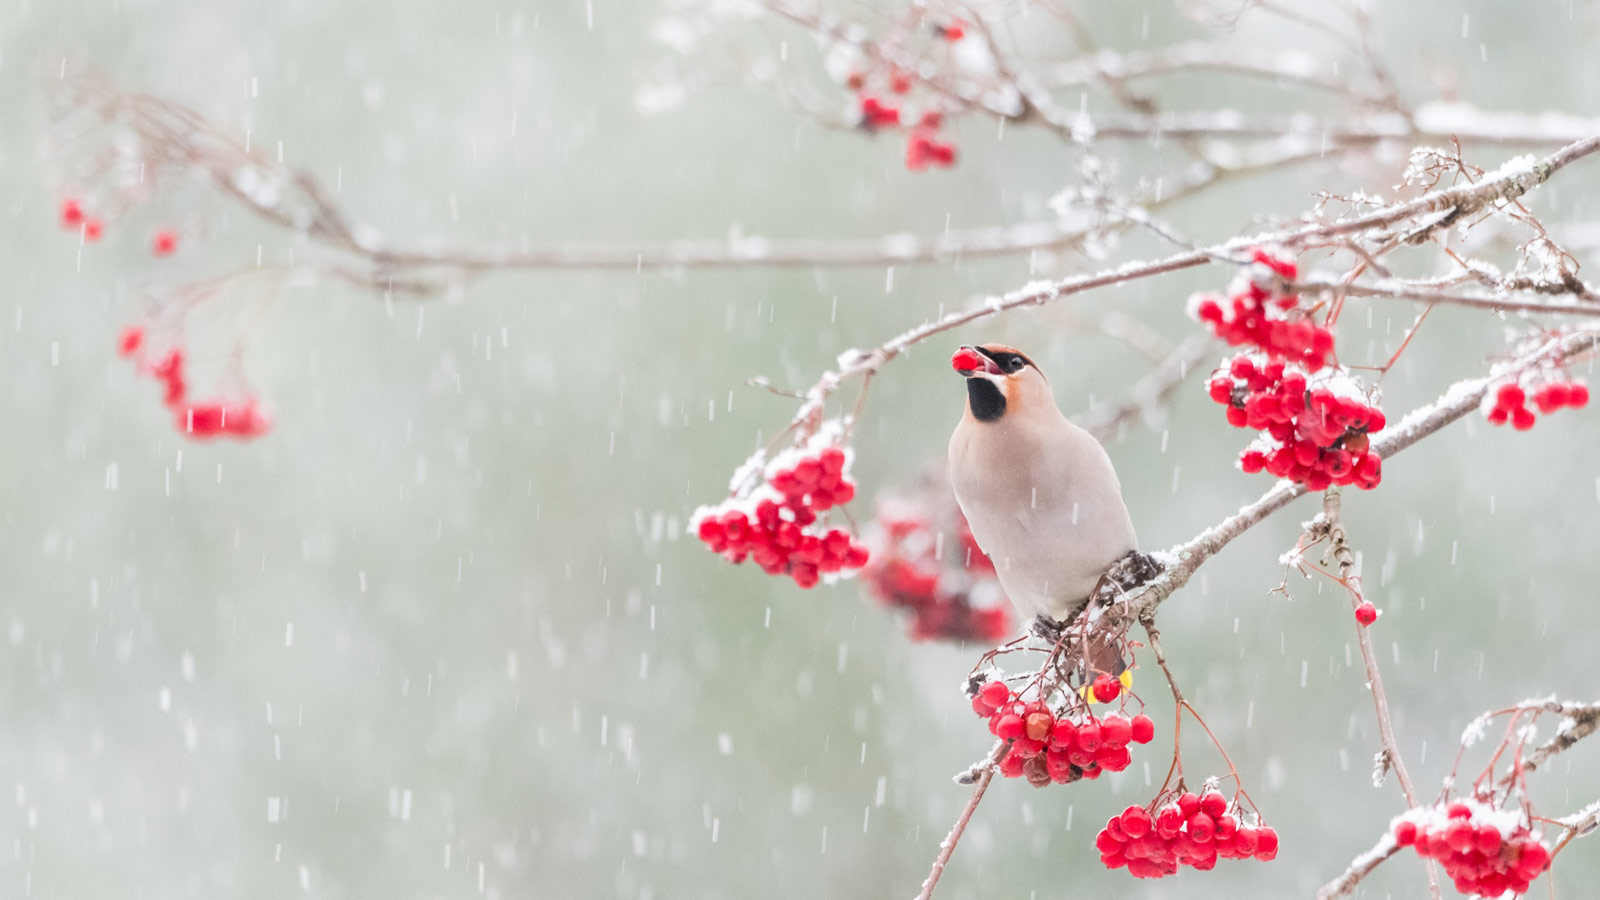 Waxwing and Rowan berries in the snow, © Alwin Hardenbol, Royal Society Publishing Photography Competition